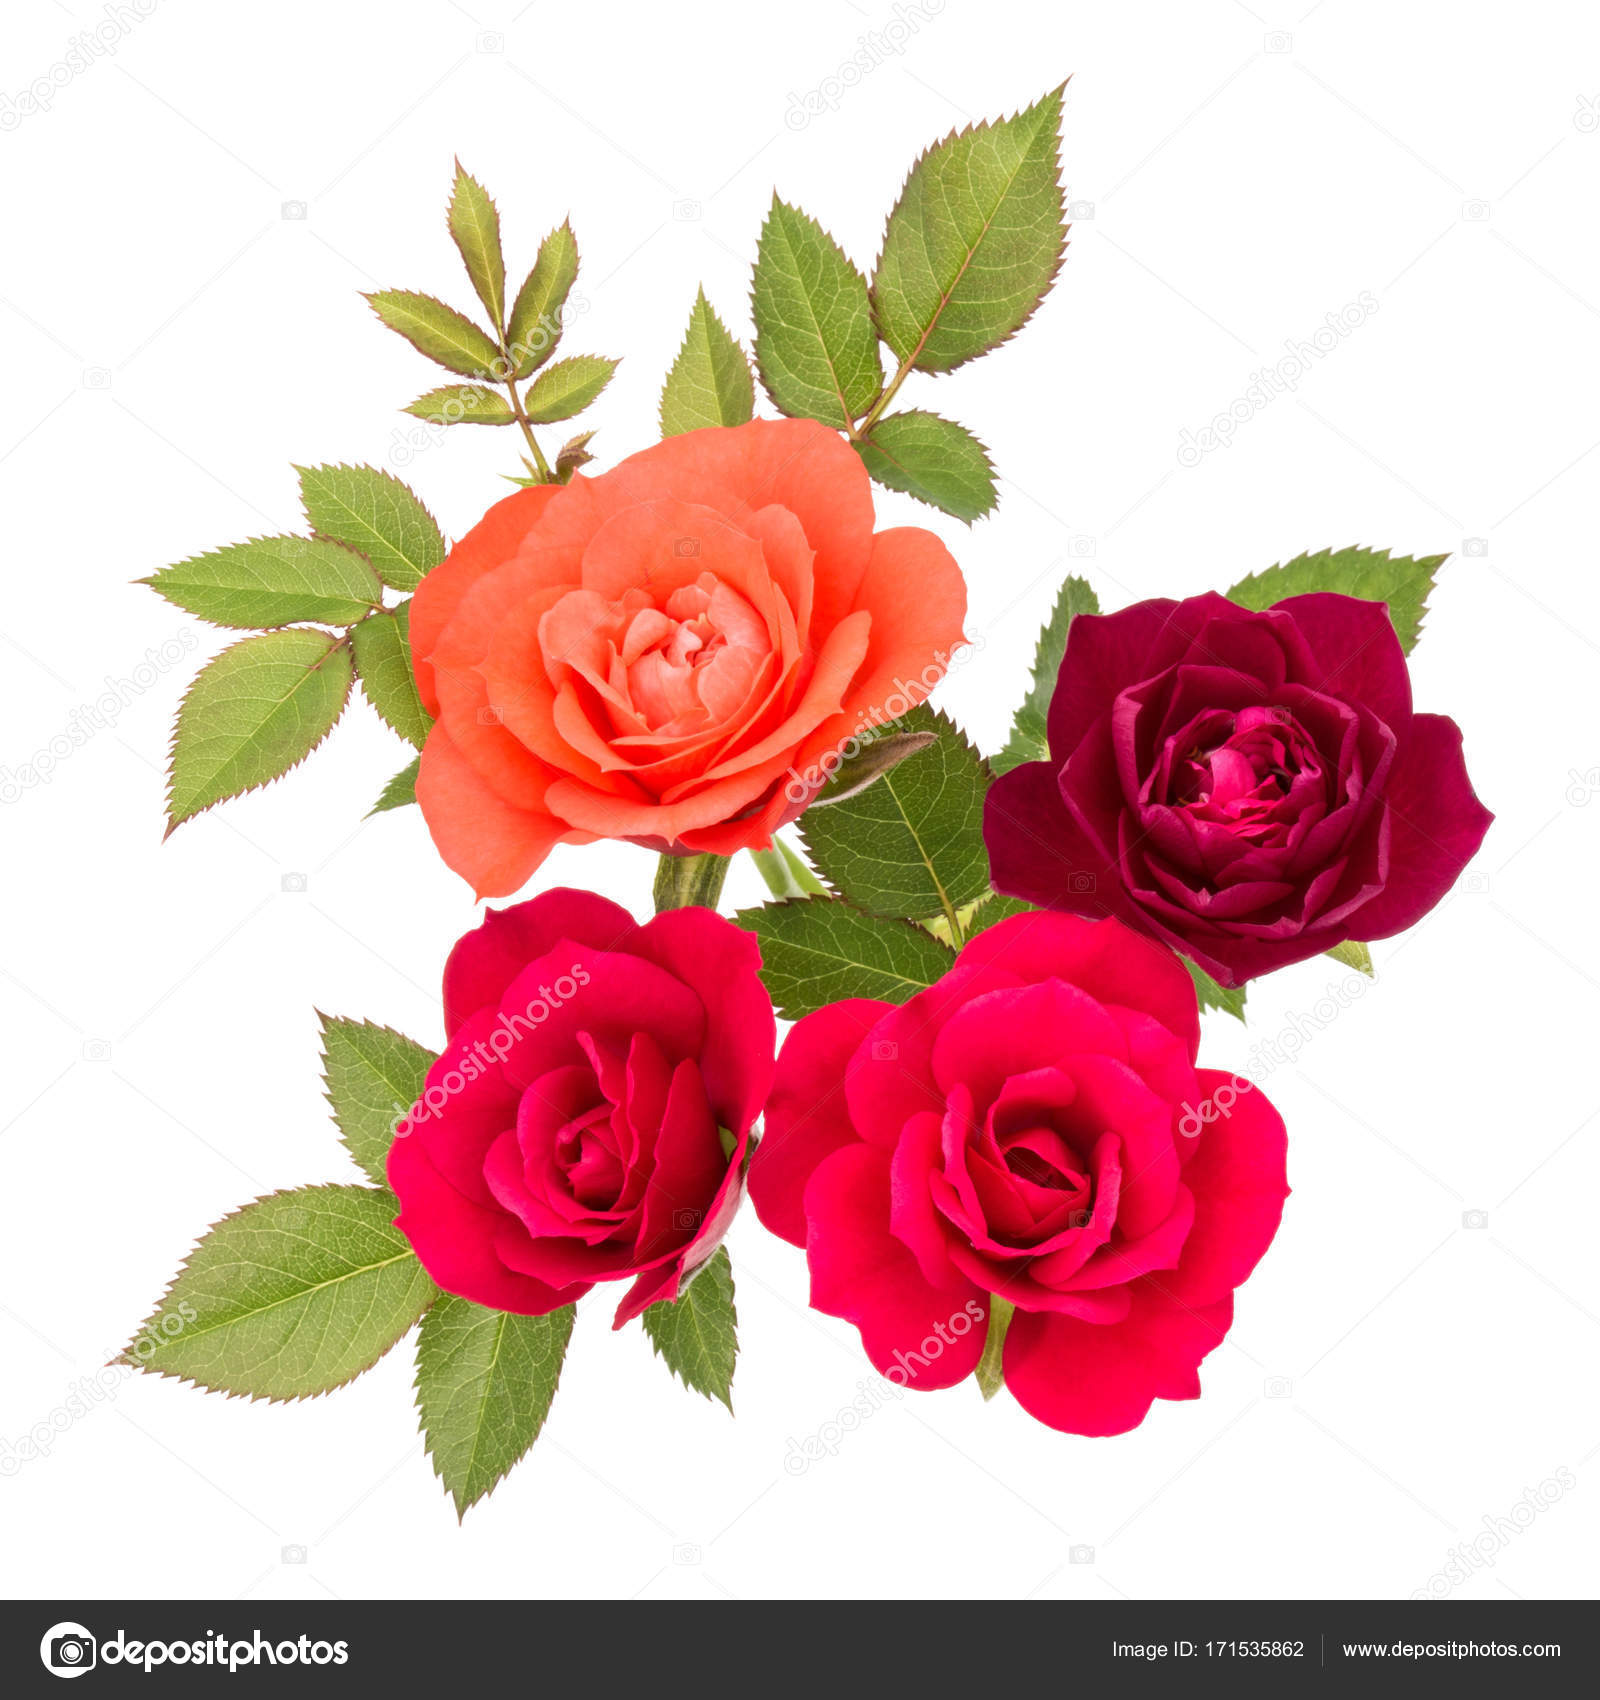 Rose flower bouquet with green leaves — Stock Photo © natika #171535862